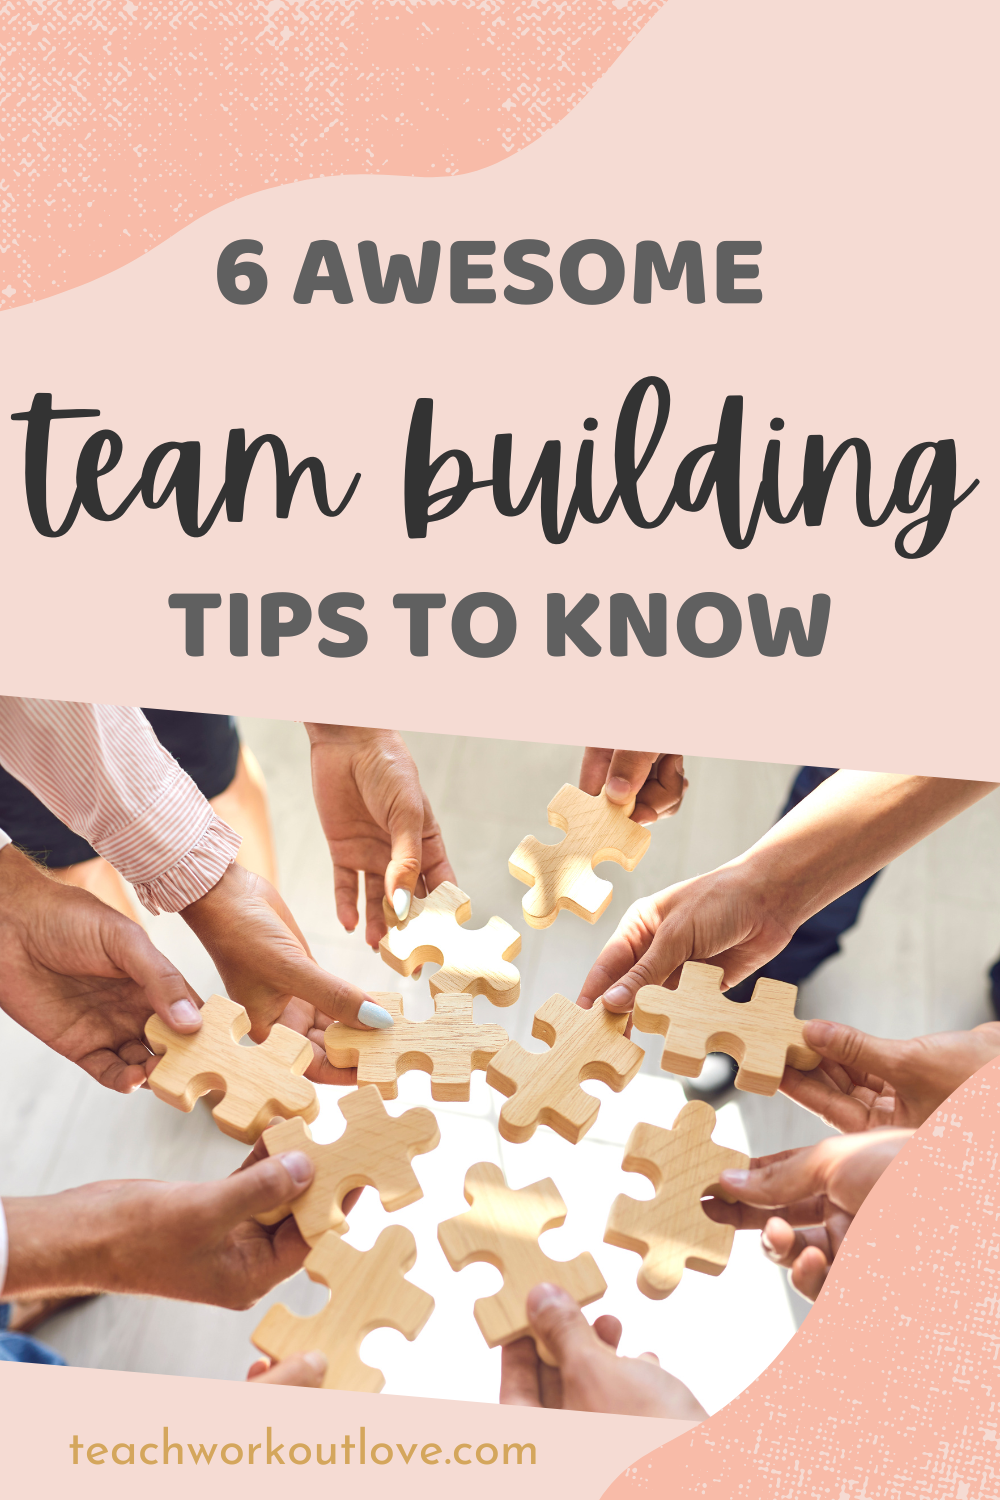 Are you looking for the top team building tips to enhance your team’s efficiency? Try our brilliant ideas now lead your team to excellence.